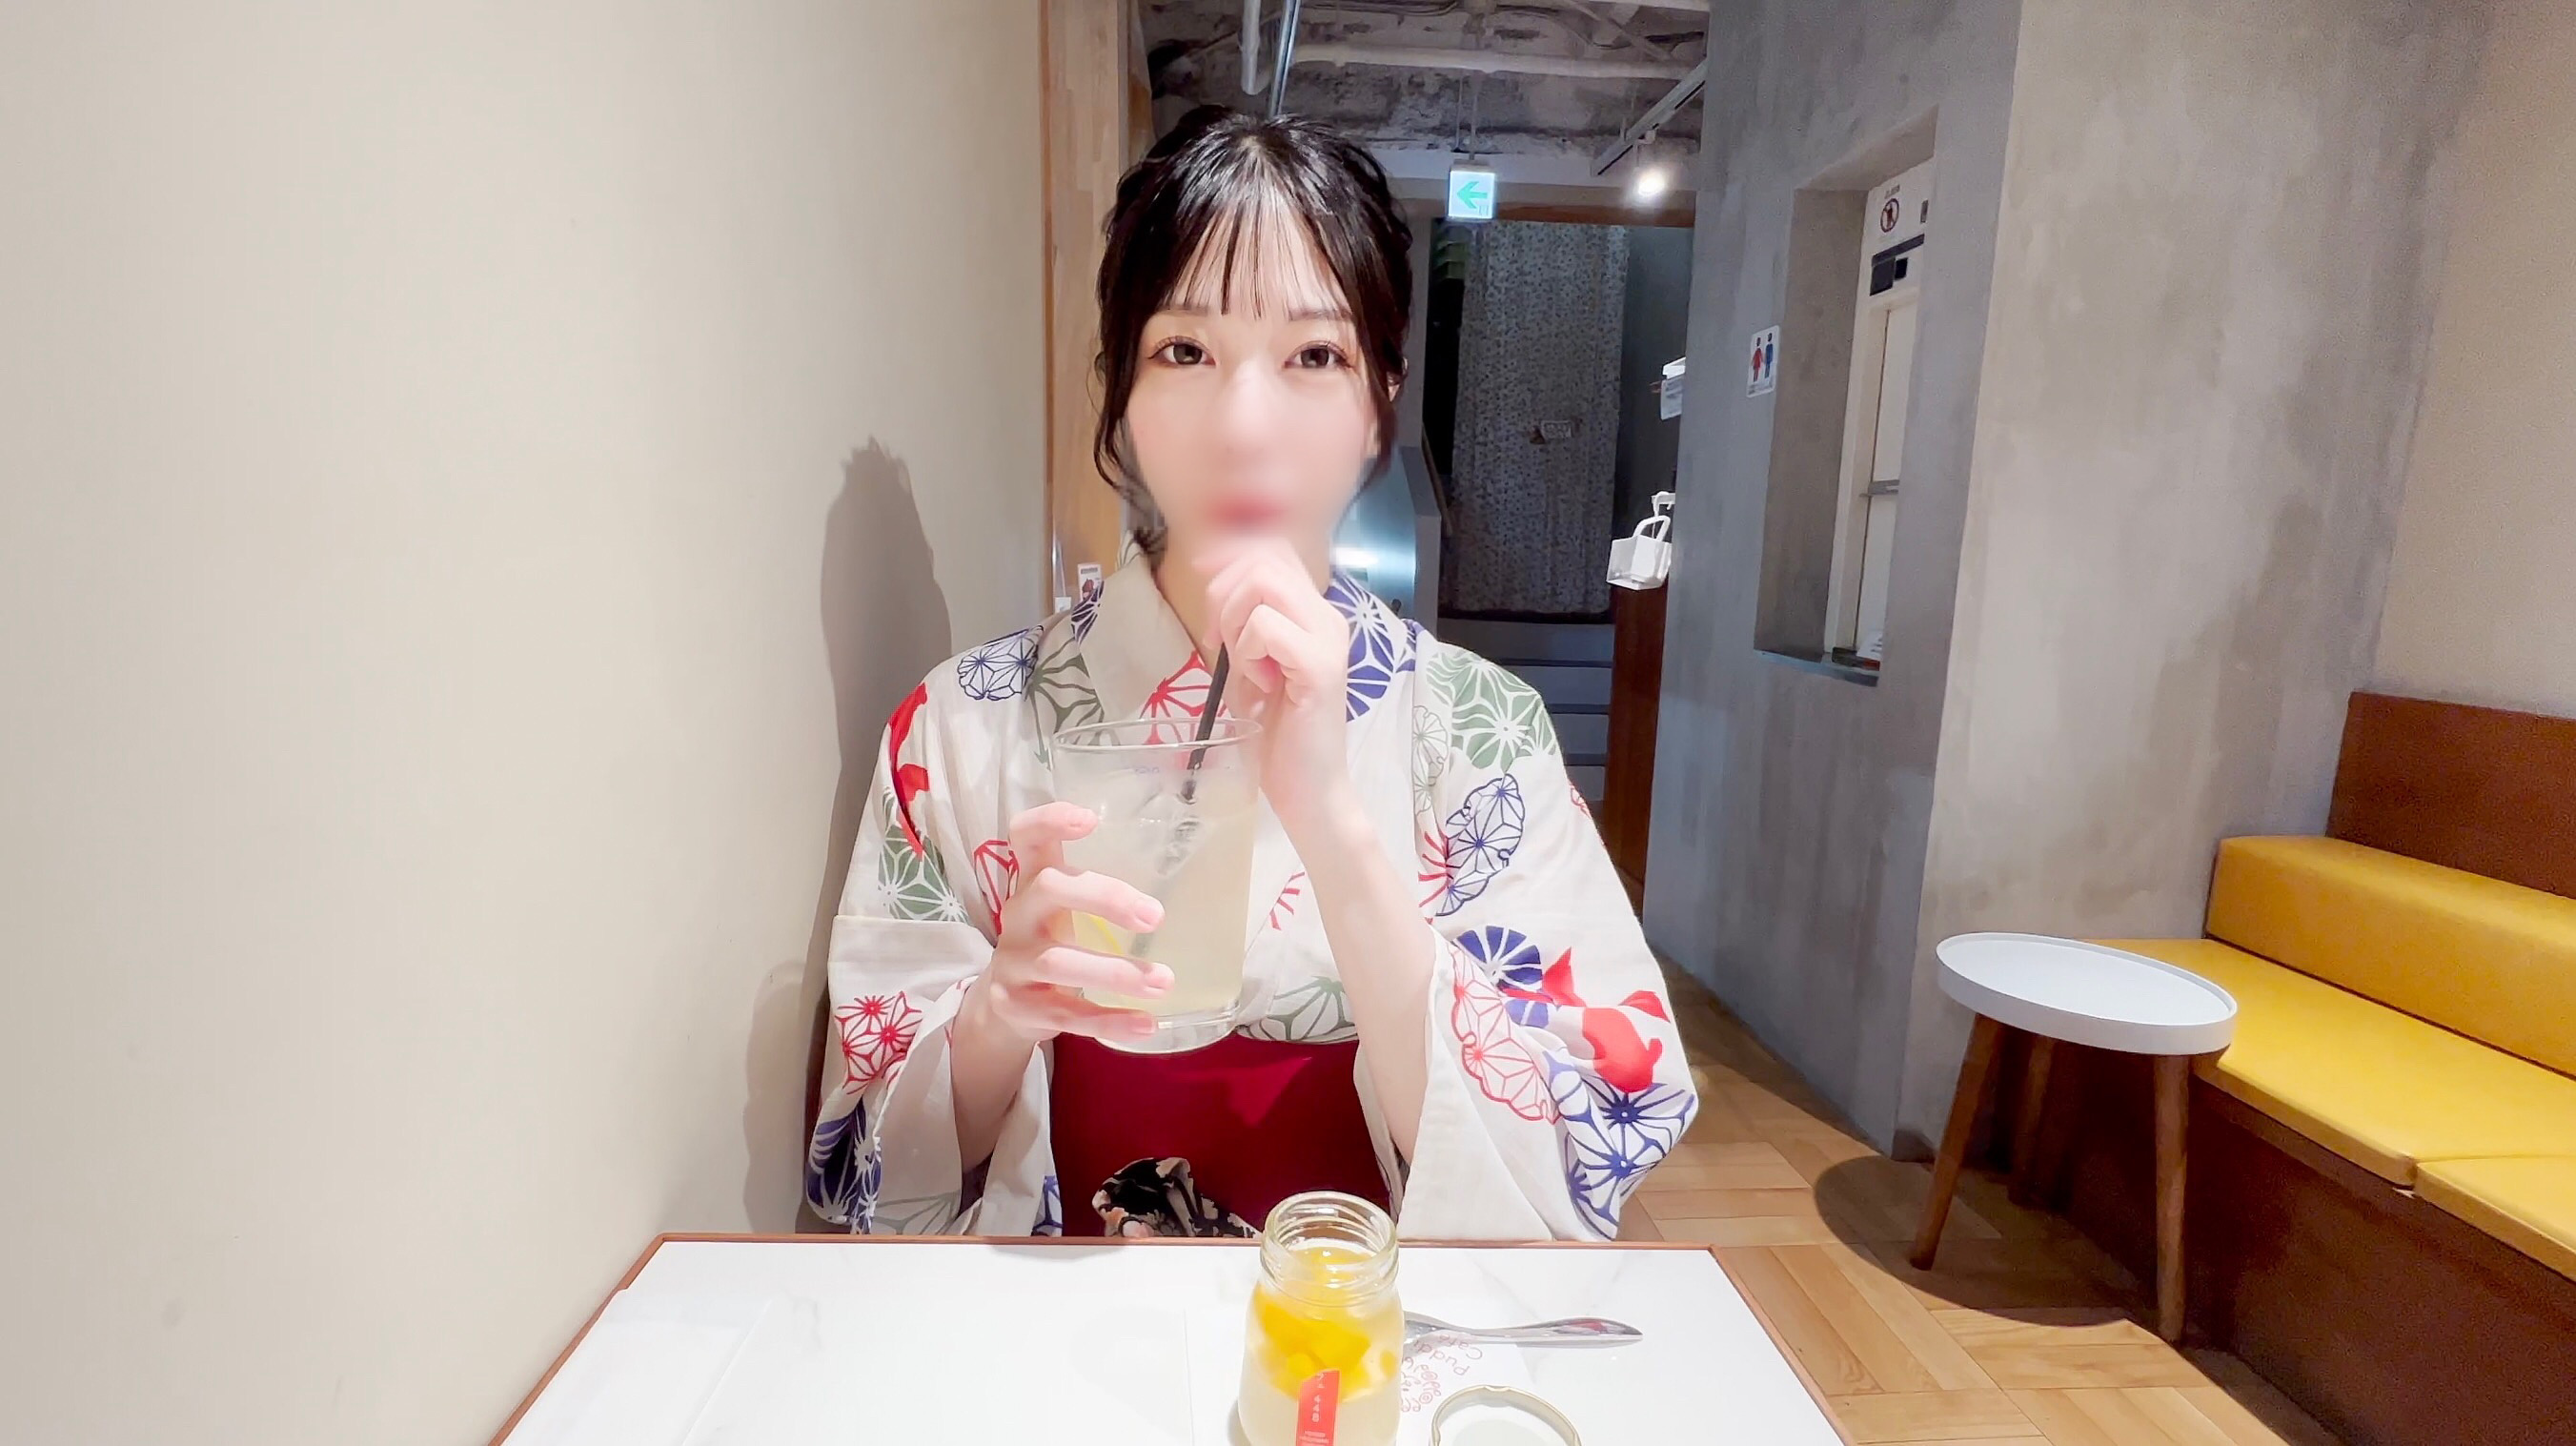 Angels Second Coming Complete Appearance Extremely Cute Aoyama Gakuin University Student Himari A Dreamy Yukata Date Hotel During Summer Vacation Intense Shots Of Rich Creampie SEX